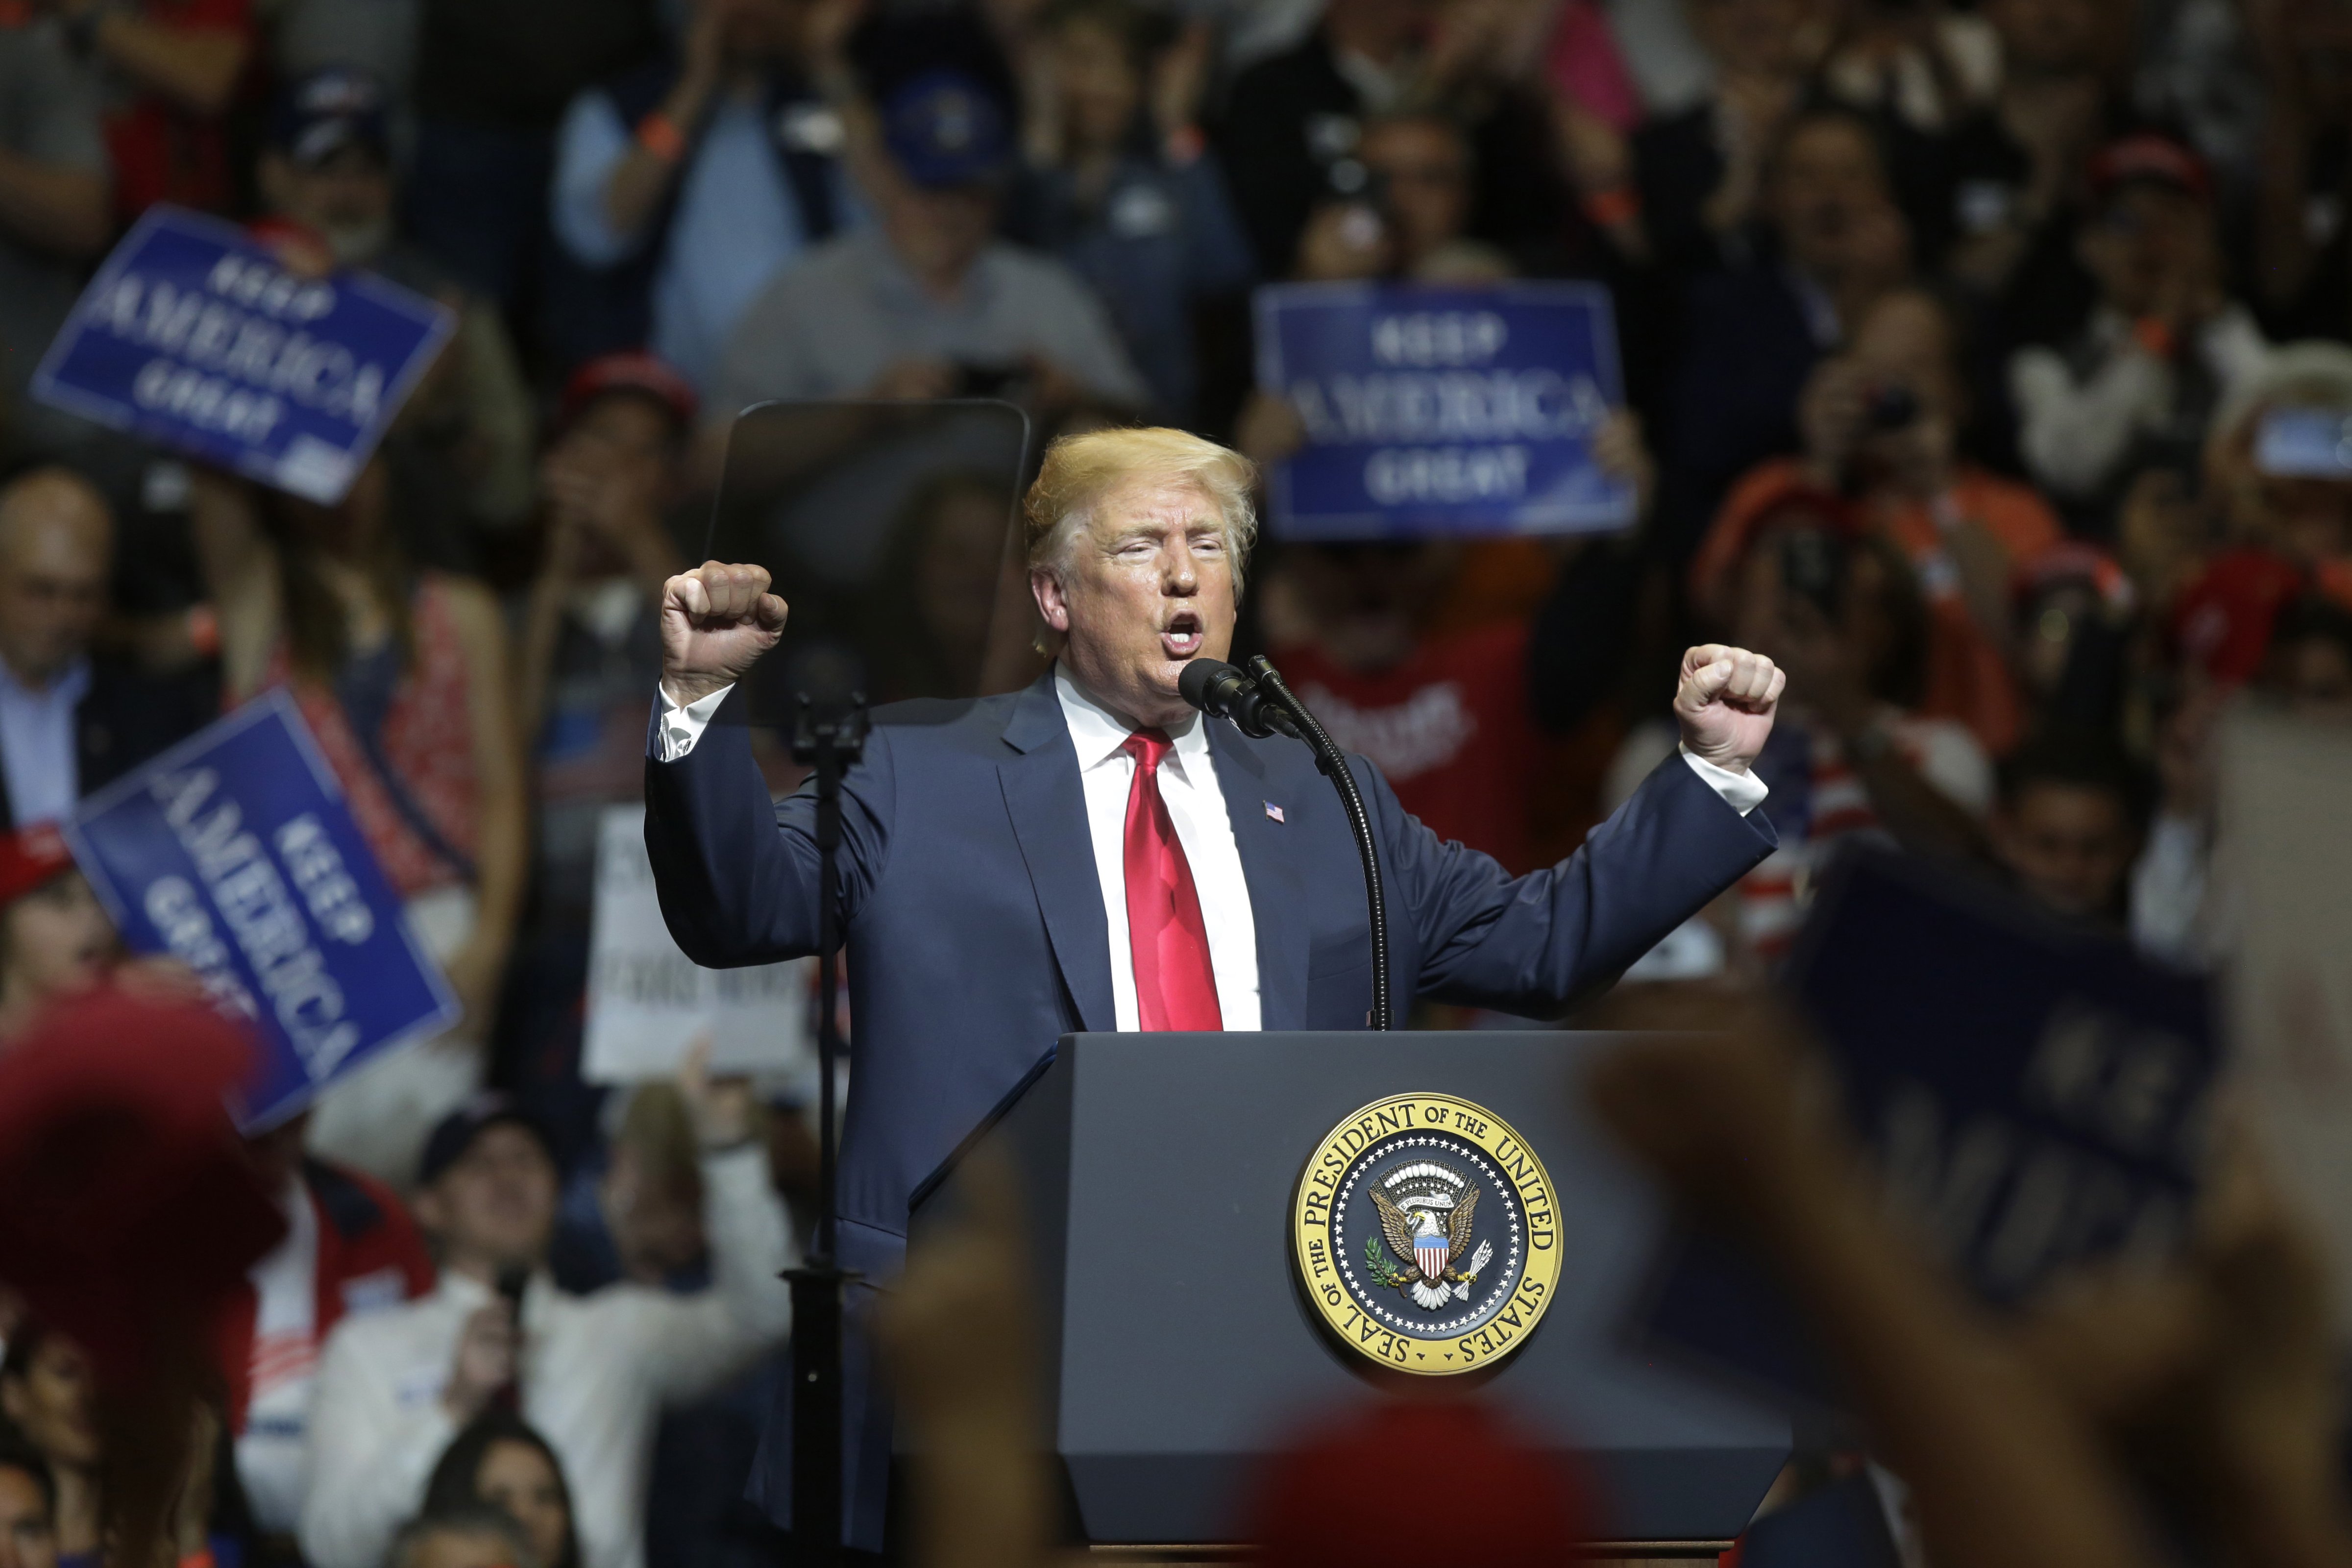 U.S. President Donald Trump speaks during a rally in Elkhart, Indiana, on May 10, 2018. (Joshua Lott—Bloomberg/Getty Images)